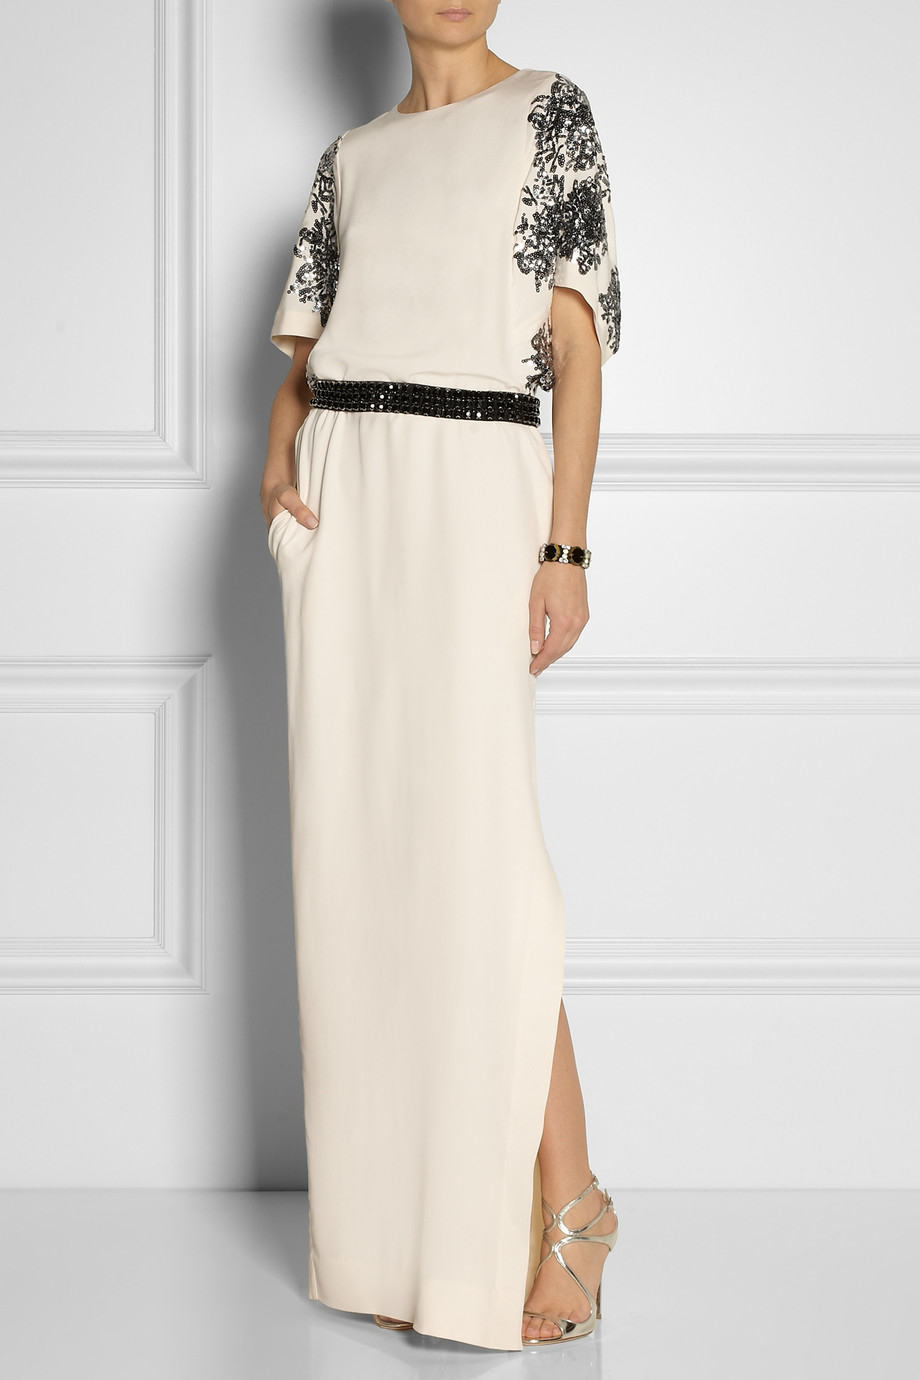 Lyst - By Malene Birger Sharmila Sequined Washed-Silk Gown in White